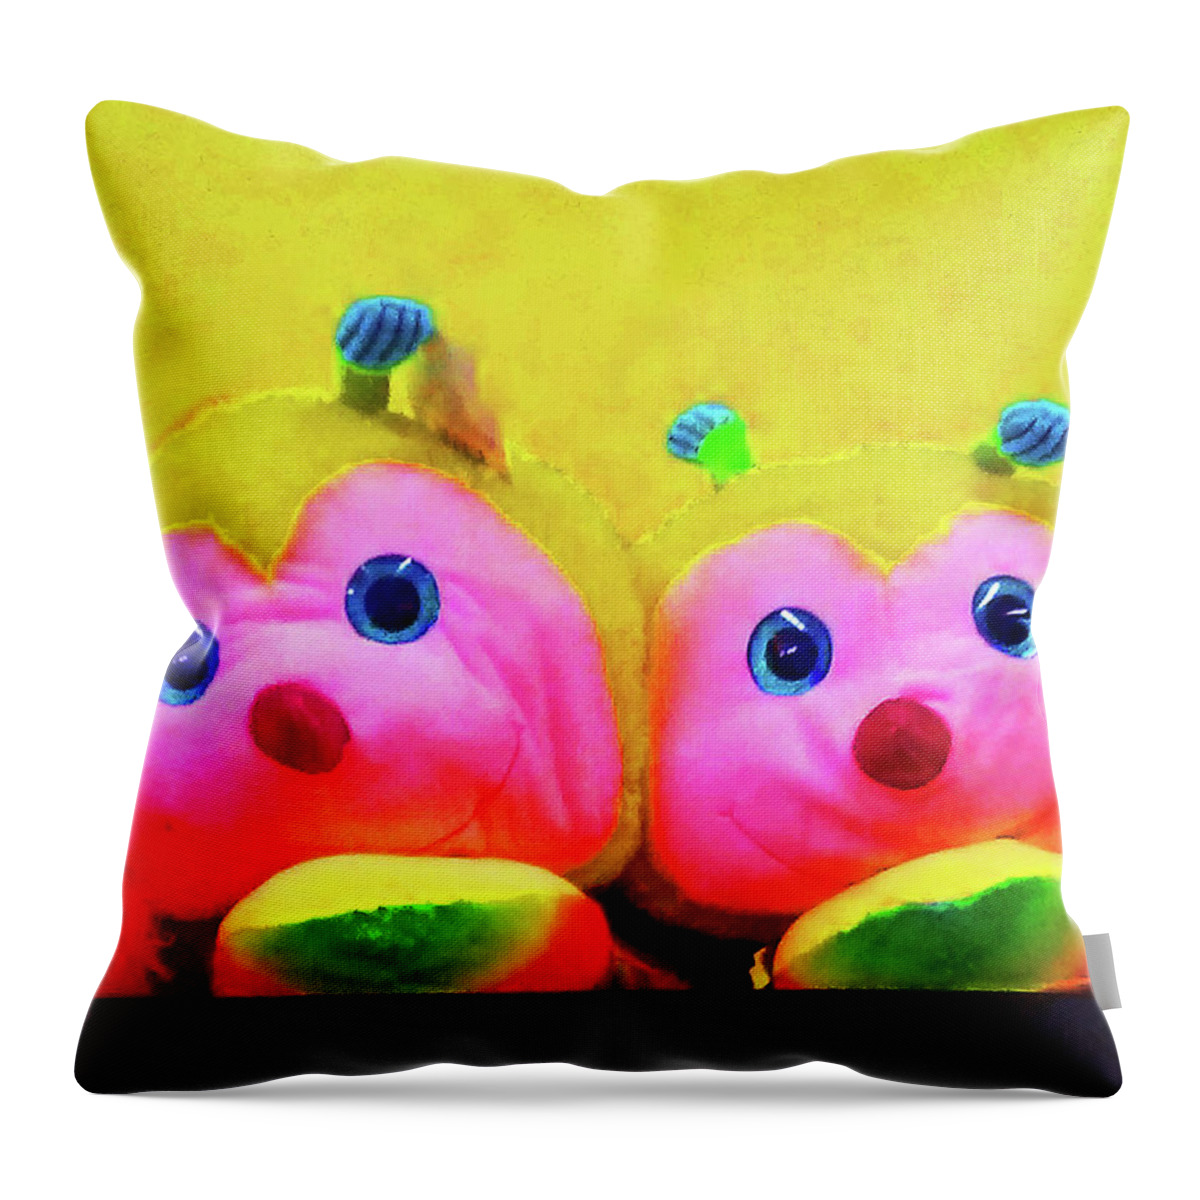 Toys Throw Pillow featuring the photograph Stuffed Bees by Andrew Lawrence